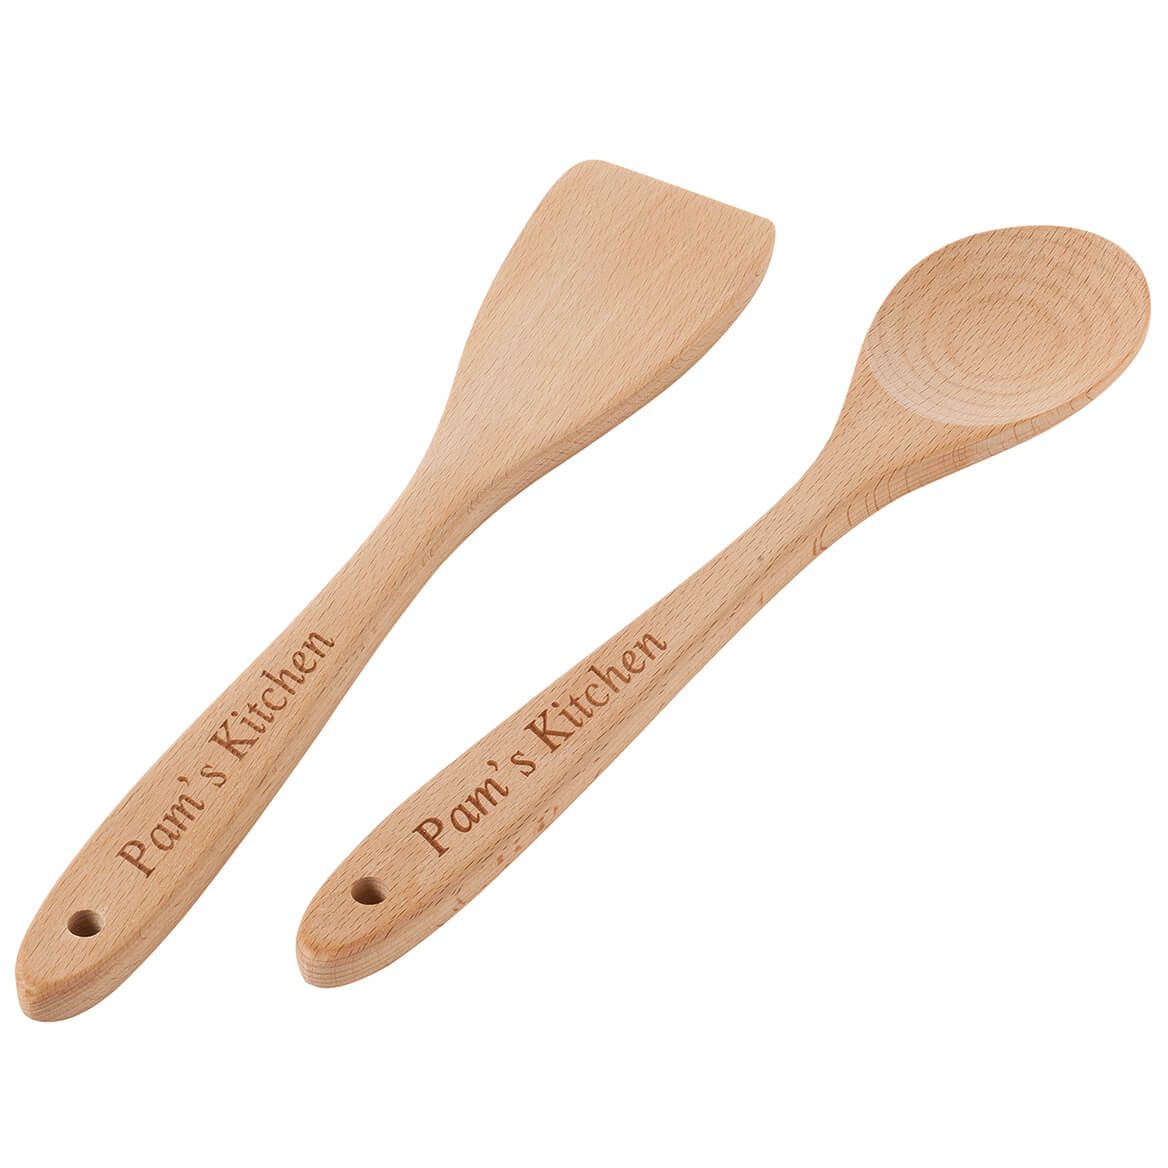 Personalized Wooden Spoon Set + '-' + 376607